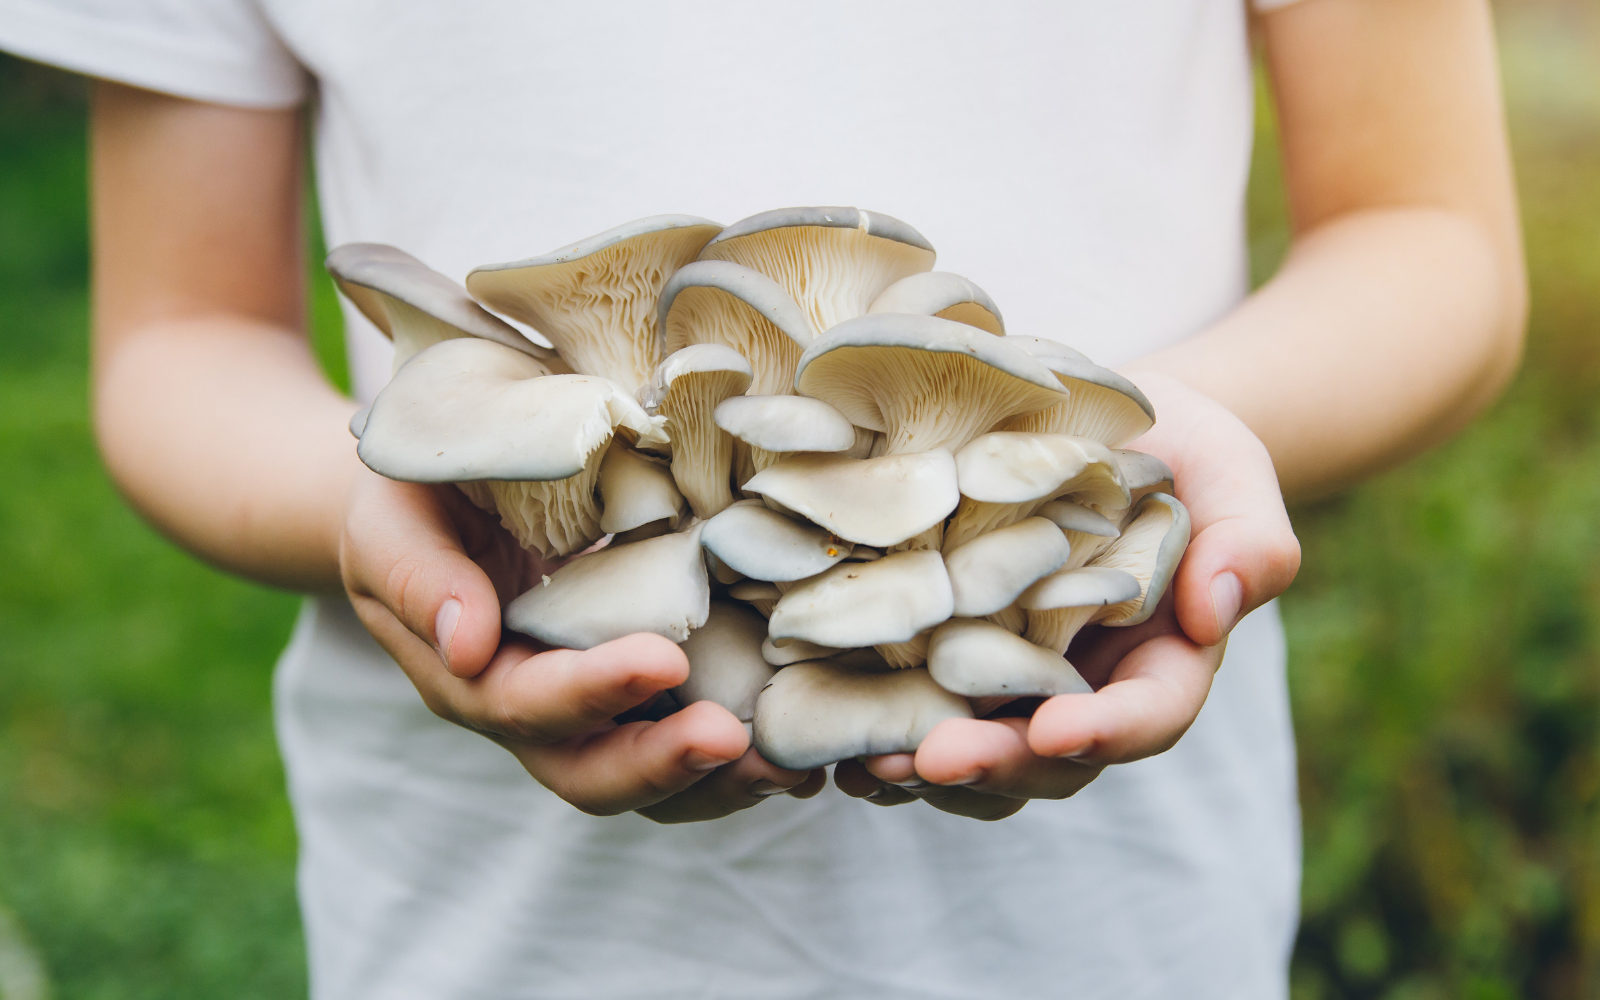 How to diet on Mushrooms